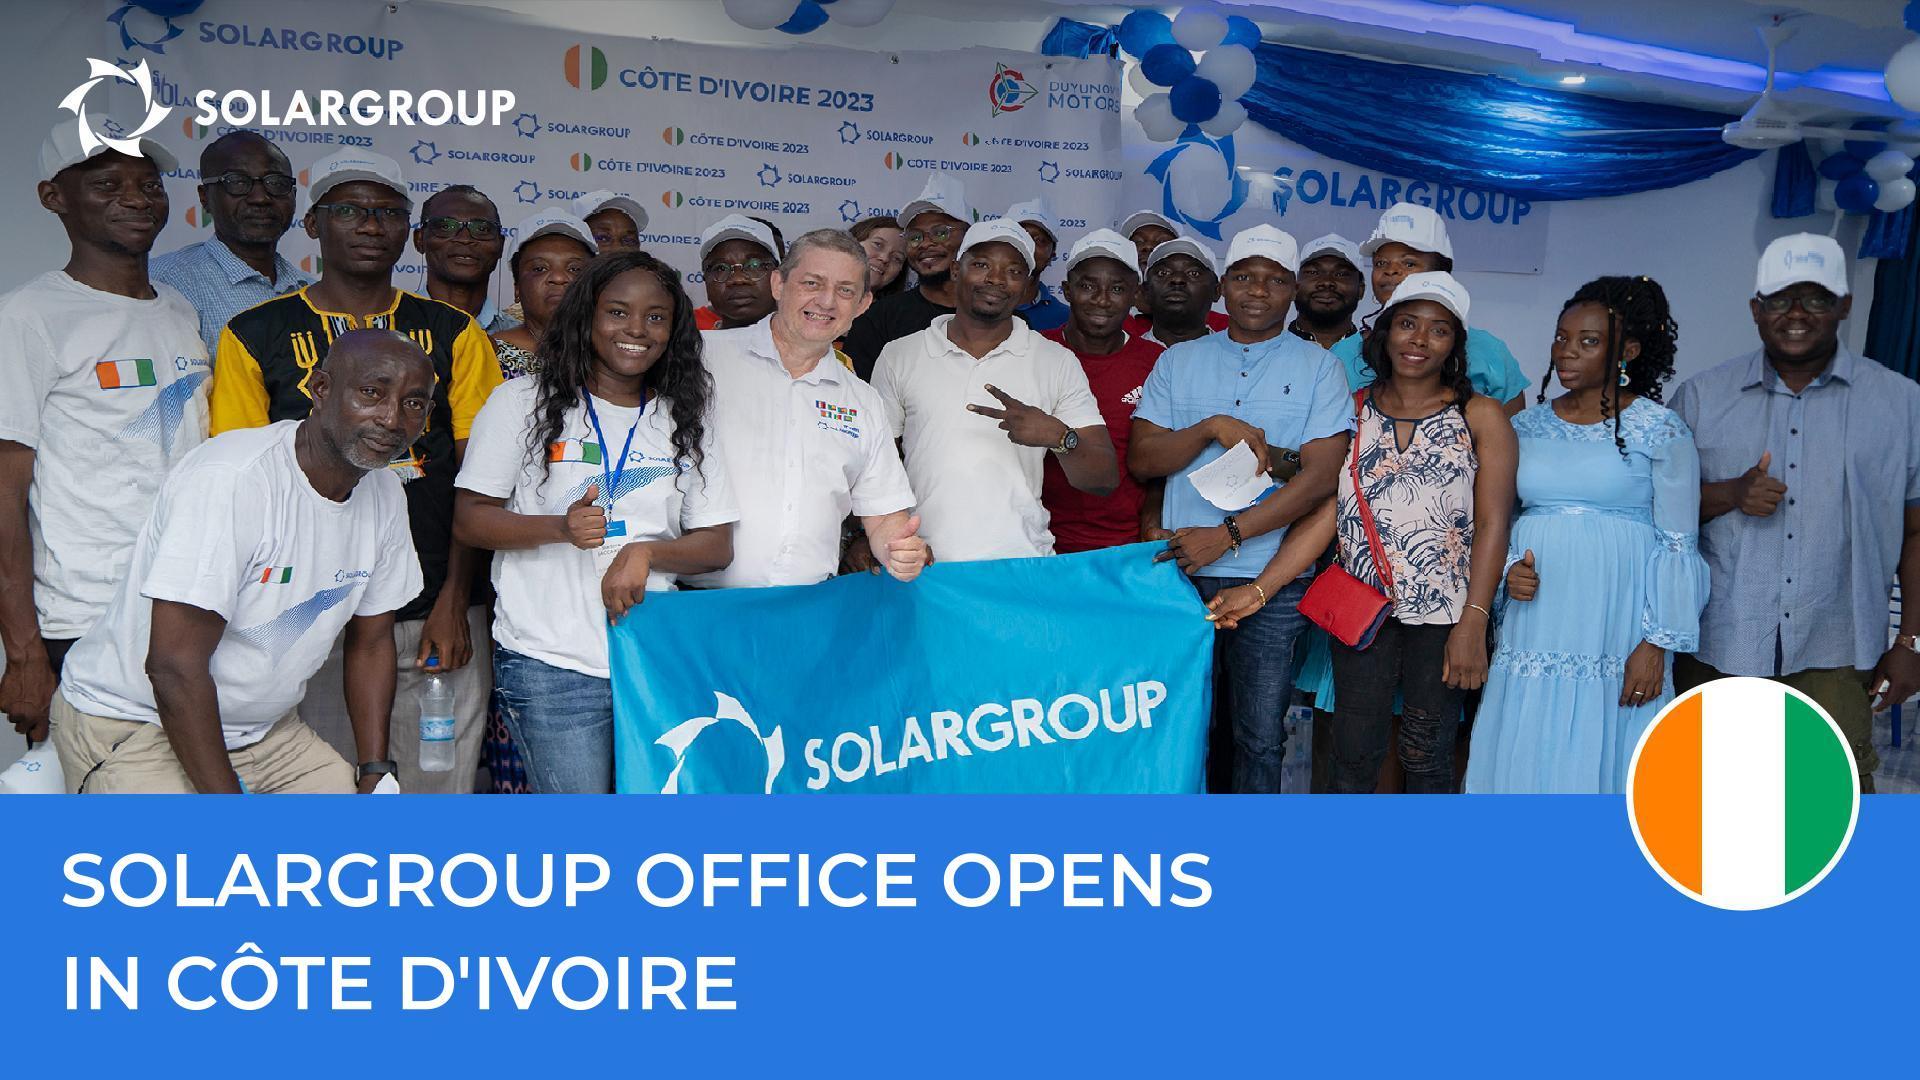 The first SOLARGROUP office opens in Côte d'Ivoire